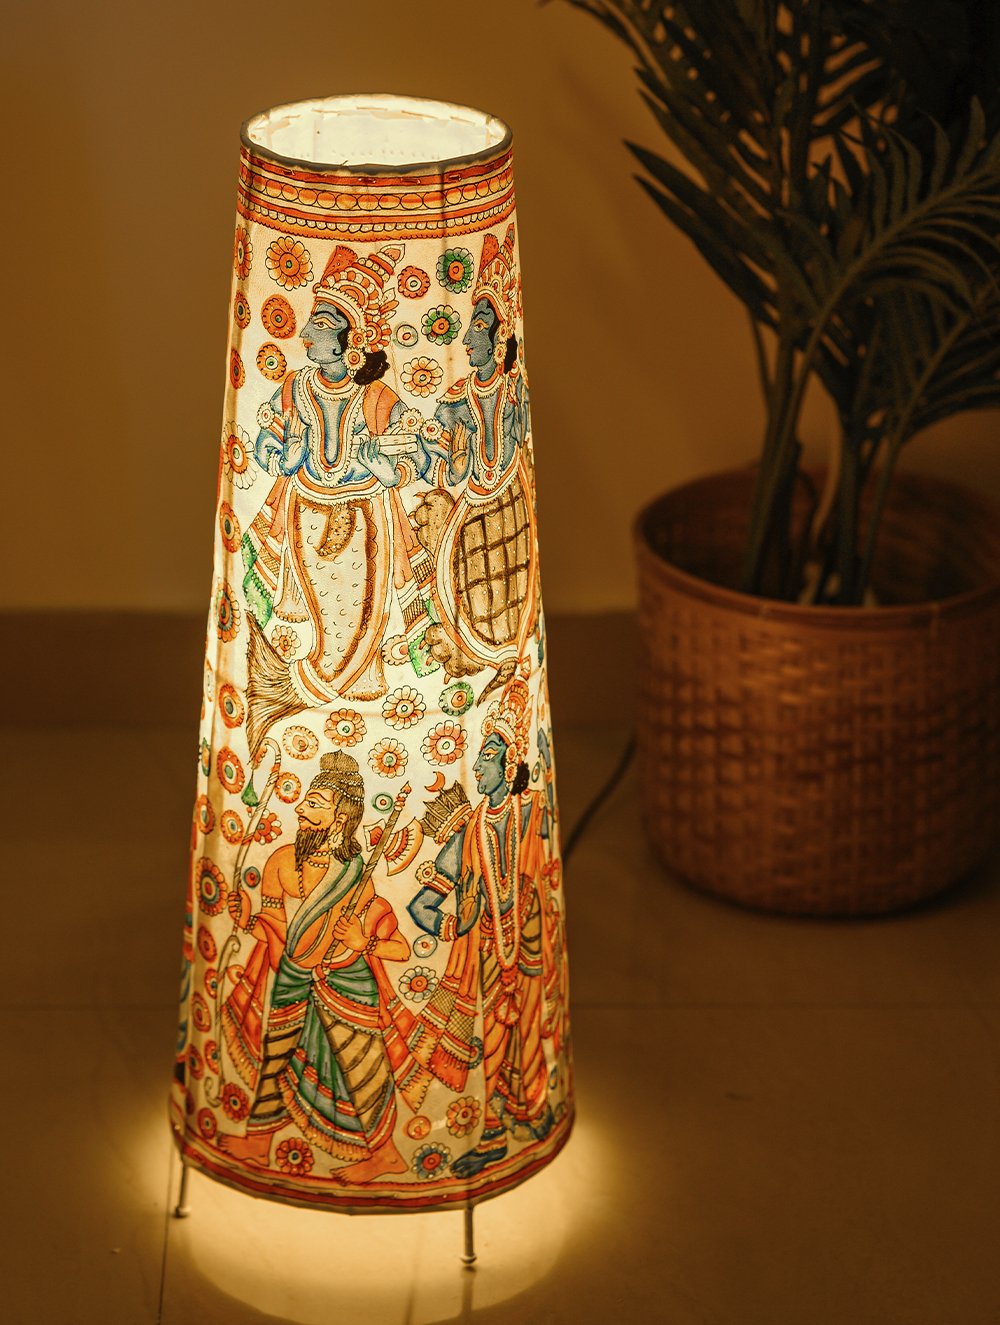 Load image into Gallery viewer, Andhra Leather Craft - Floor Lamp Shade (Large) - Dasha Avatar